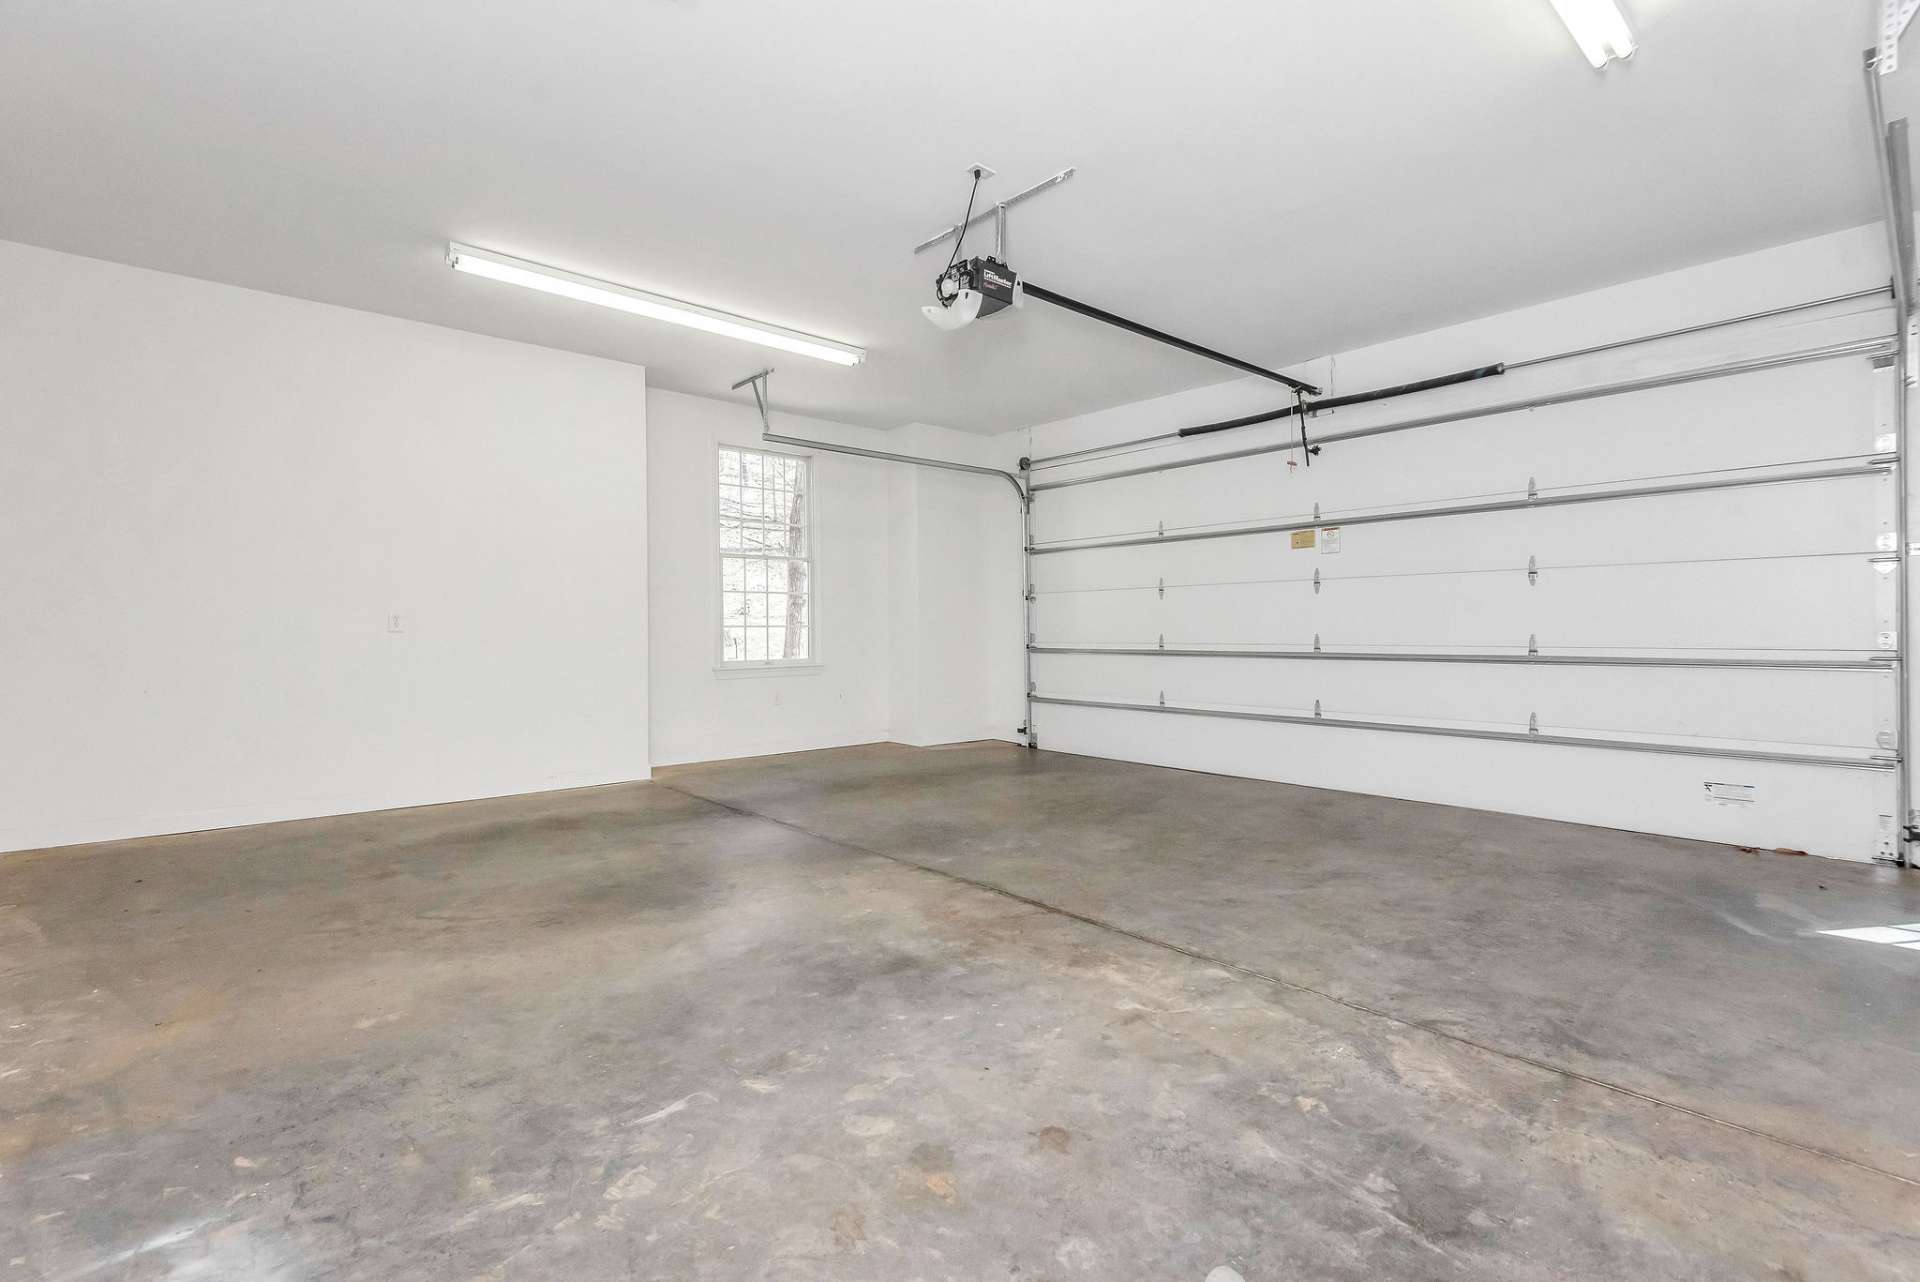 The main level 2-car garage offers ample room to comfortably park two vehicles side by side, providing convenience and protection from the elements. Plenty of space to add shelving and/or cabinets.